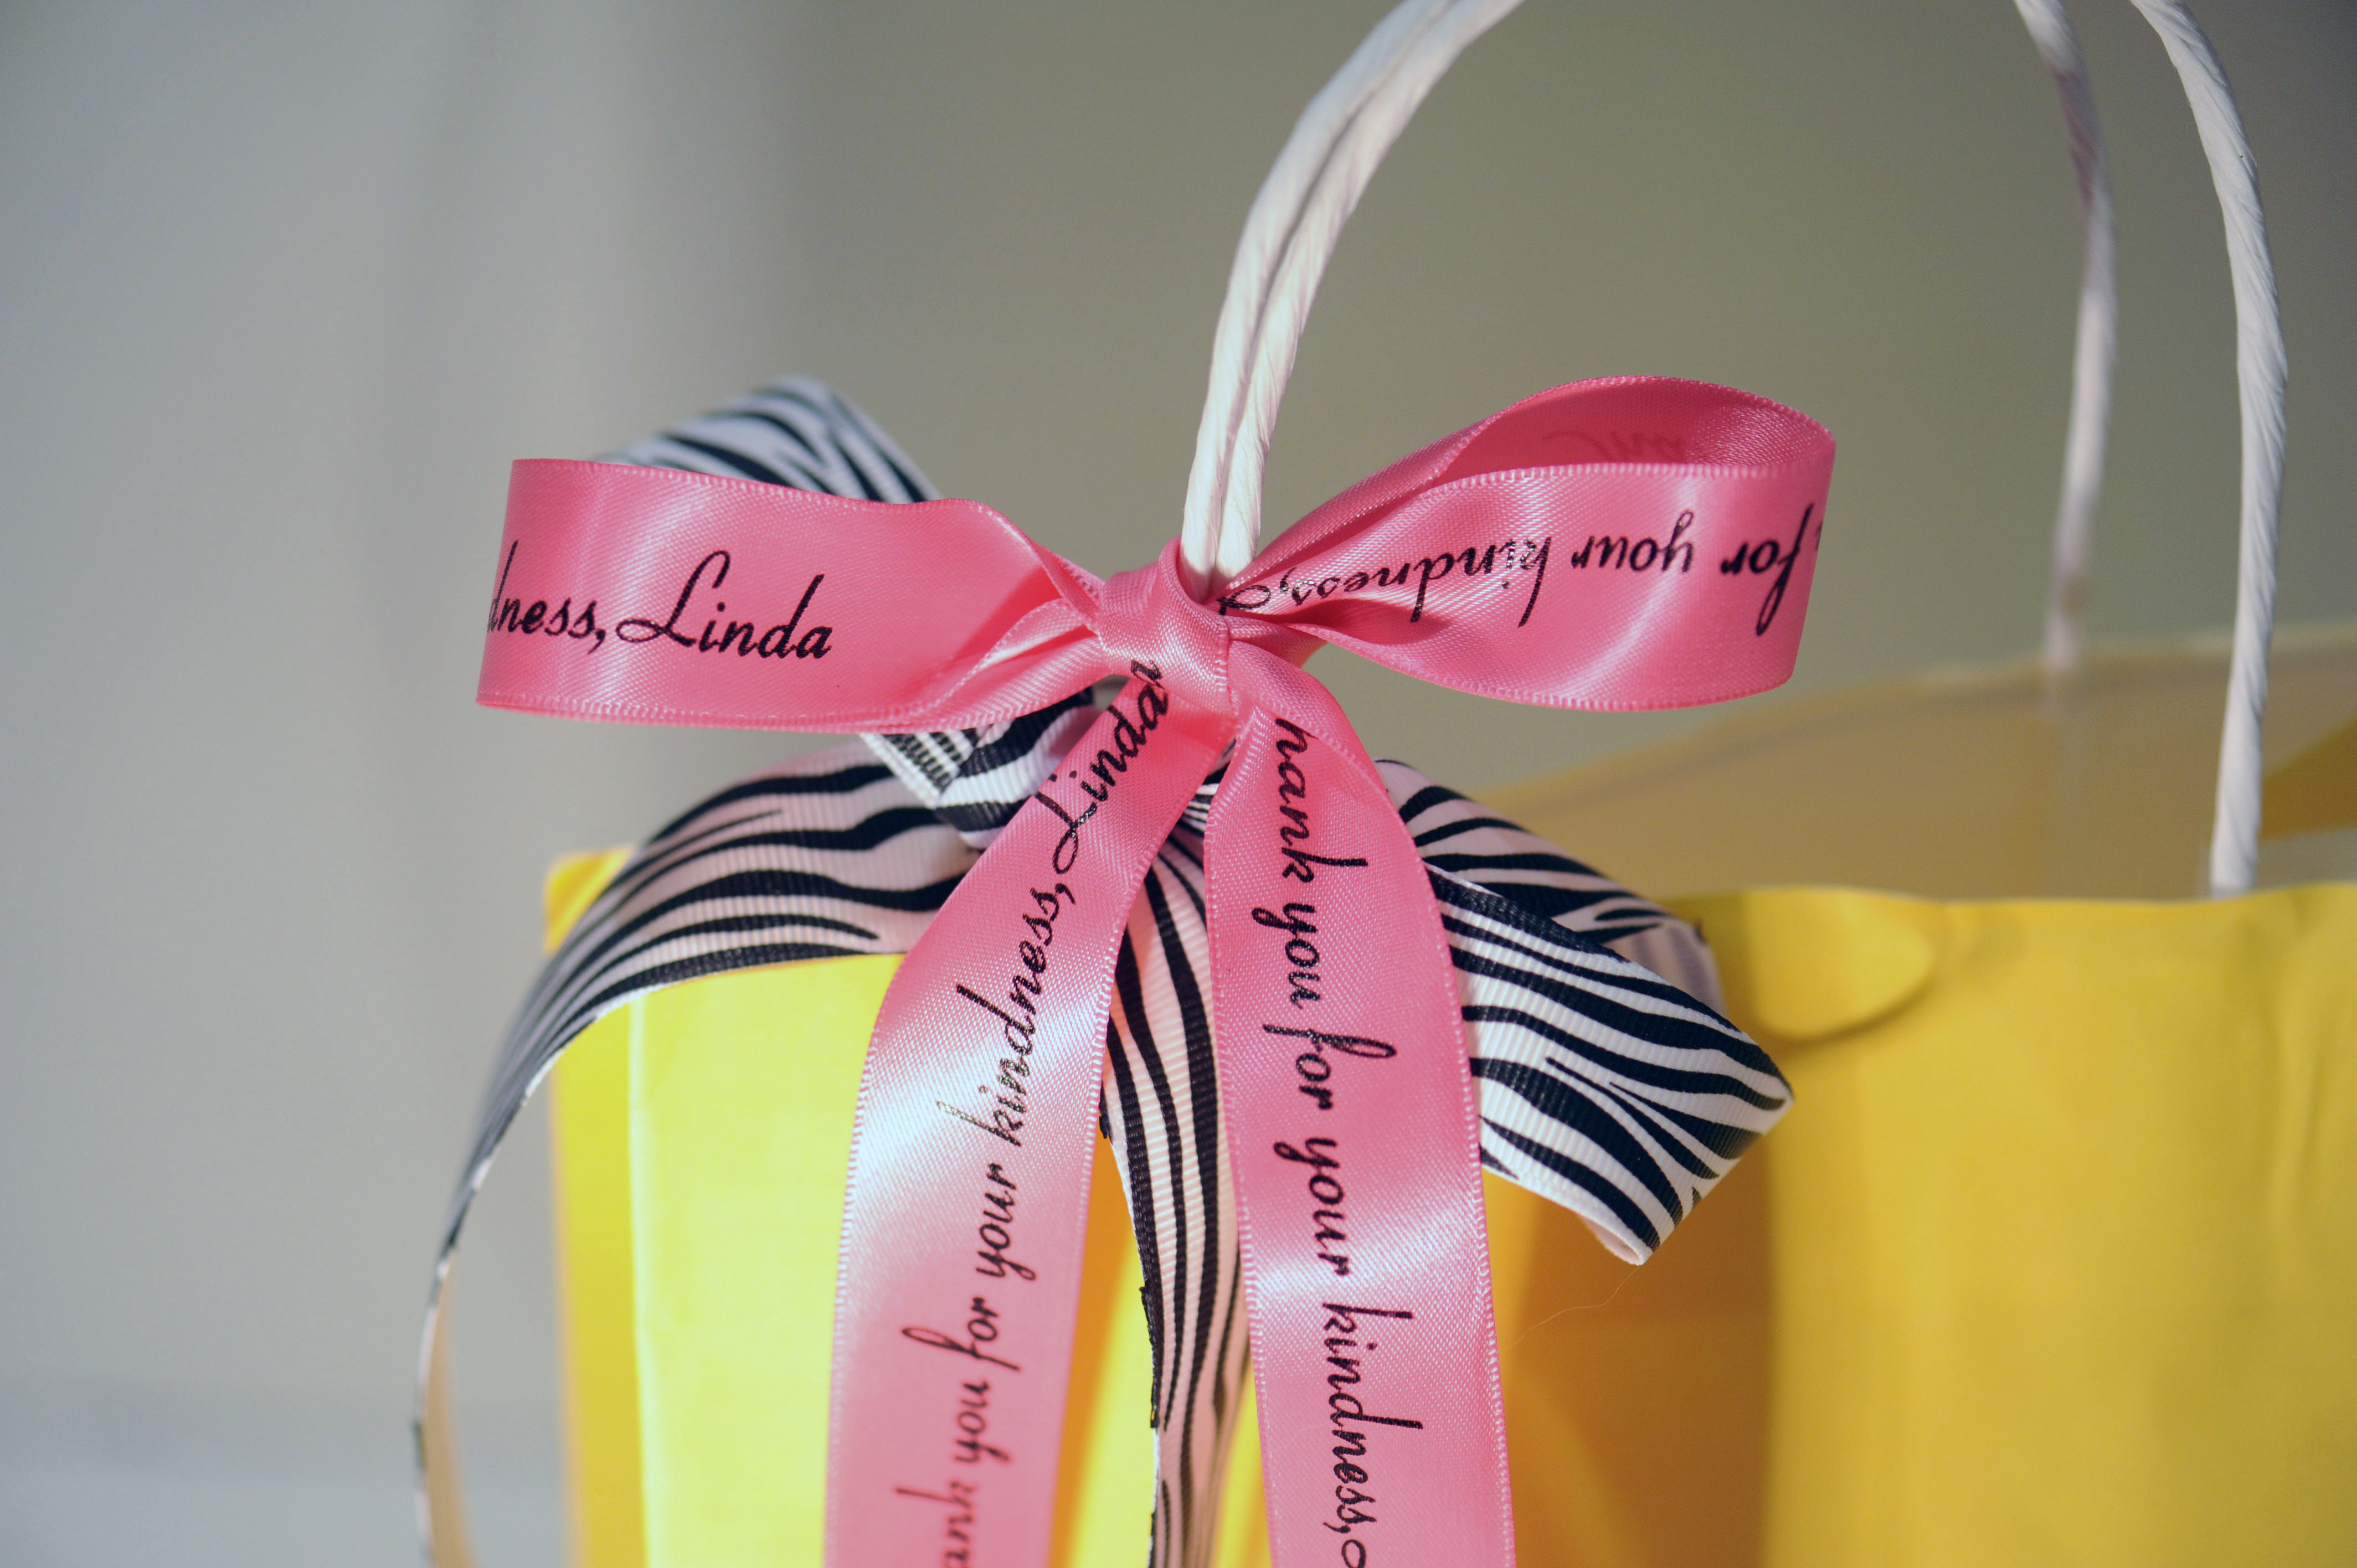 personalized wrapping ribbon